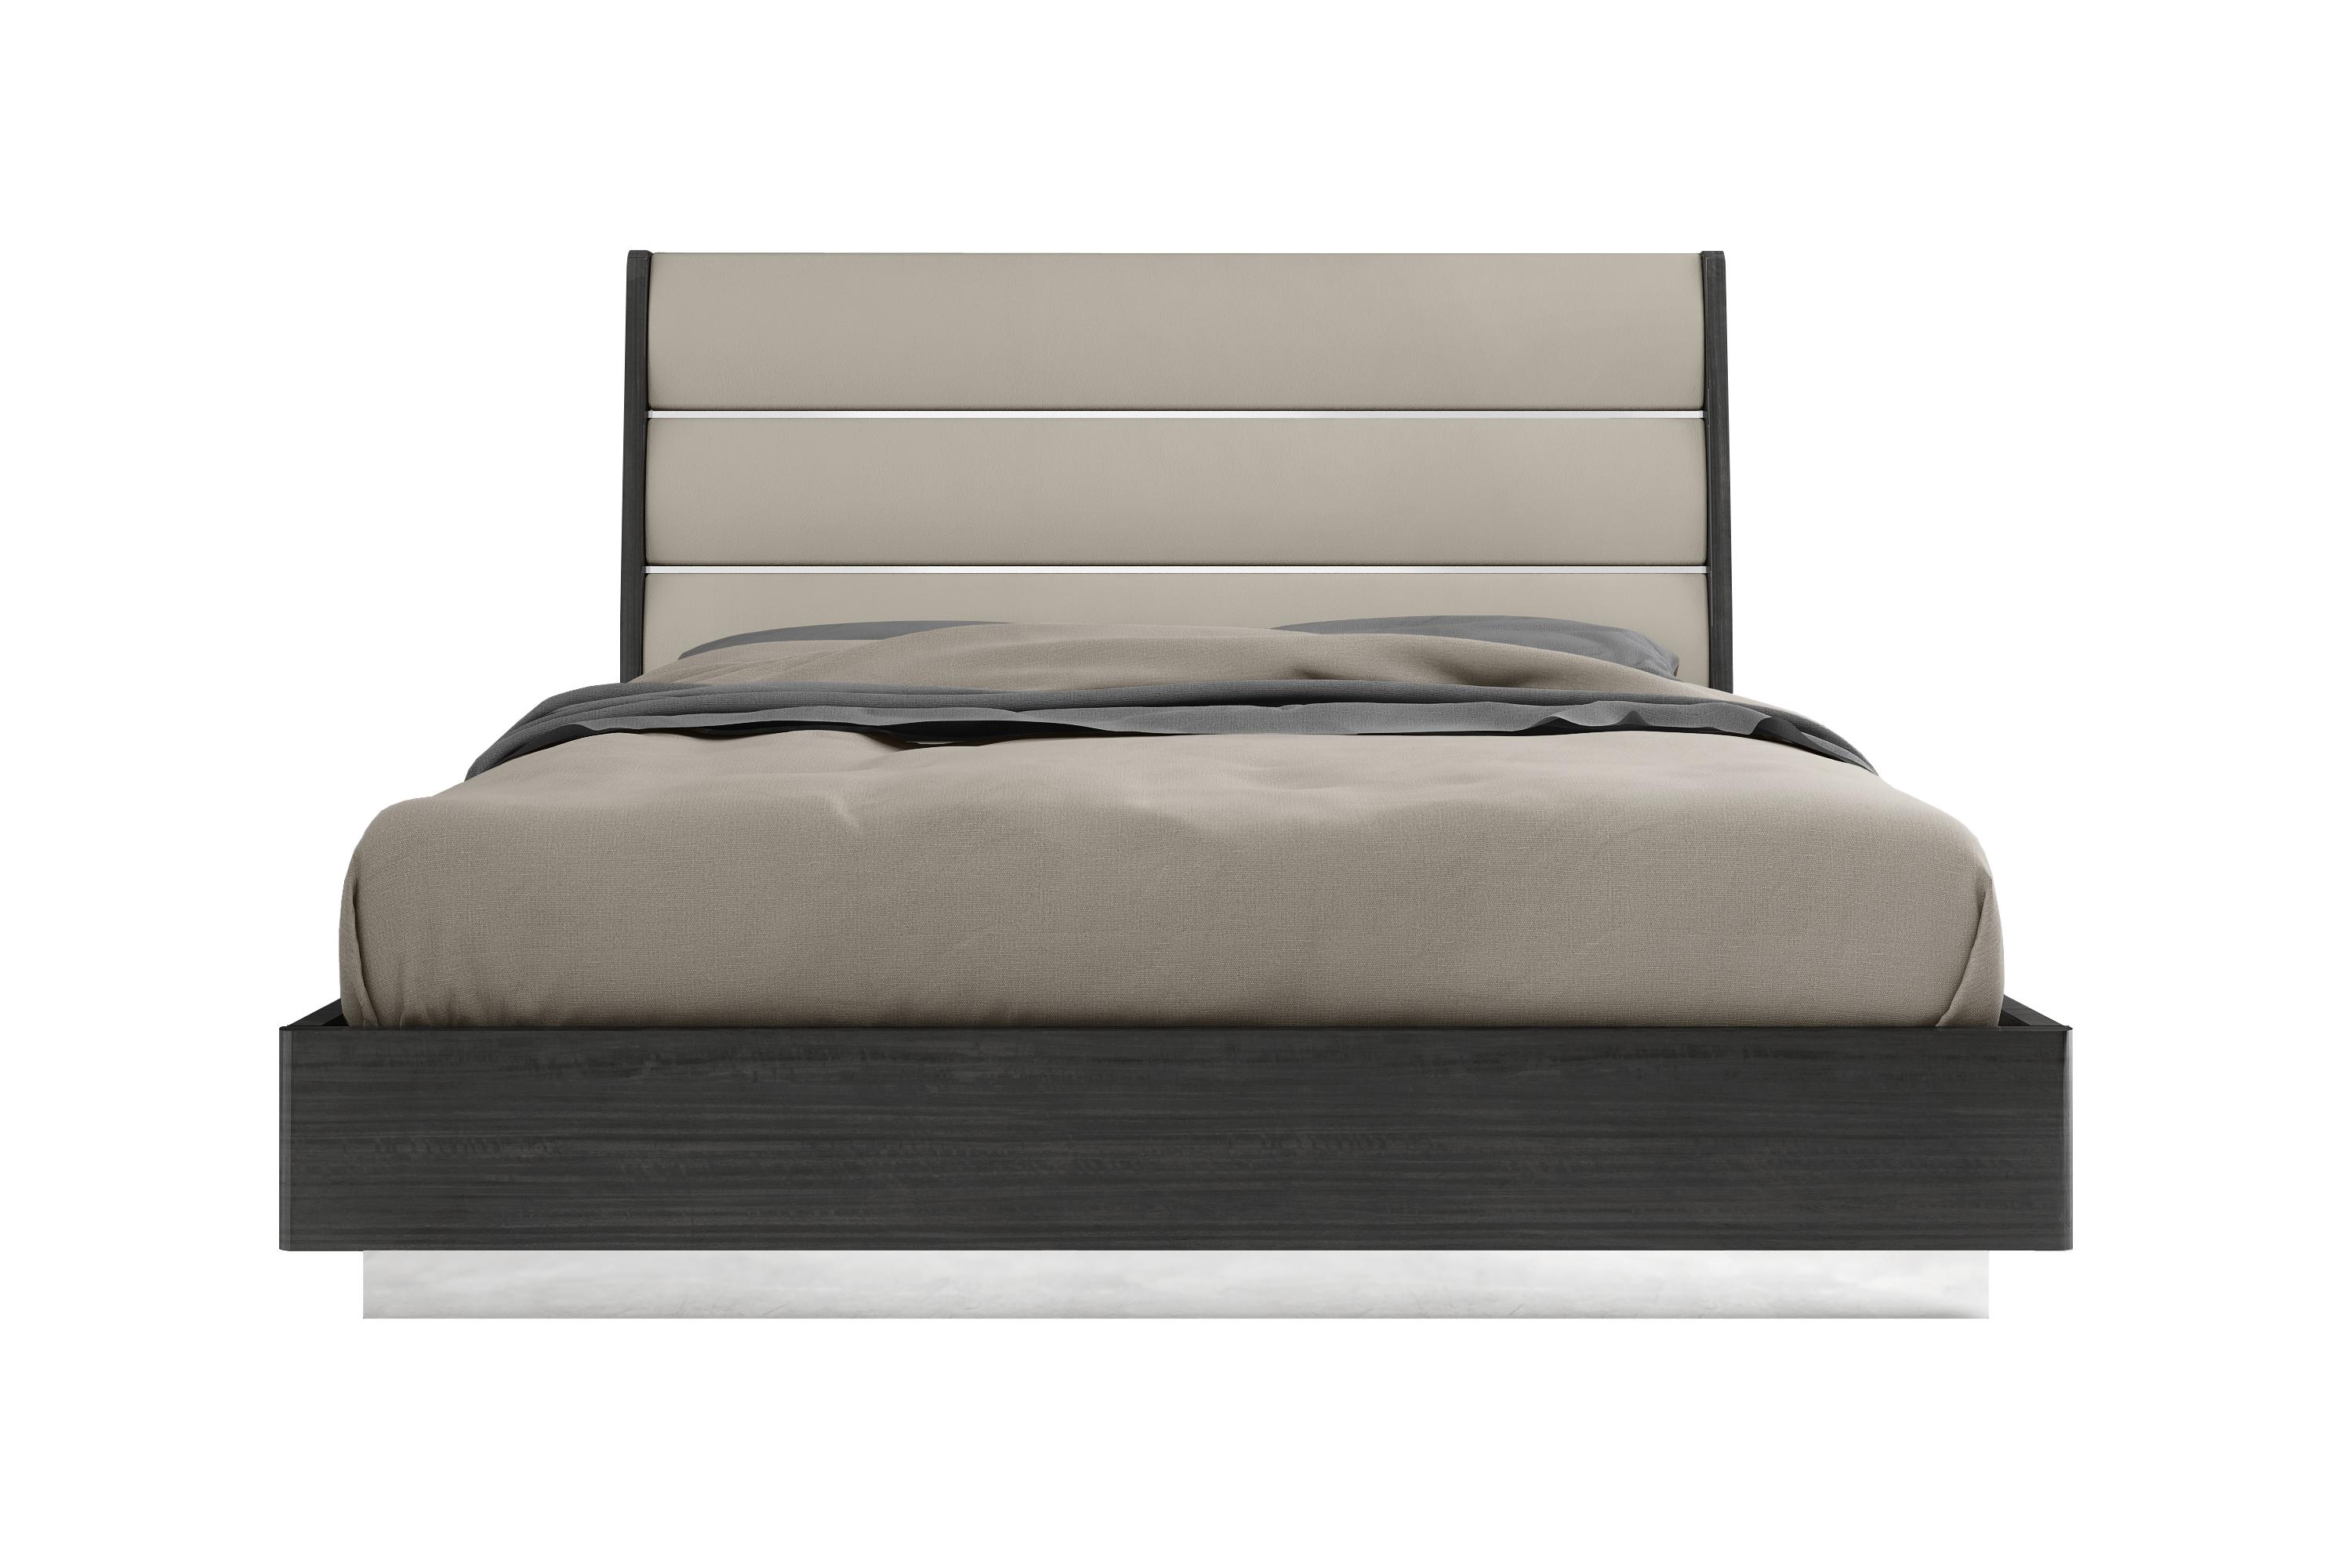 Contemporary Bed BQ1752-DGRY/LGRY Pino BQ1752-DGRY/LGRY in Dark Gray Faux Leather